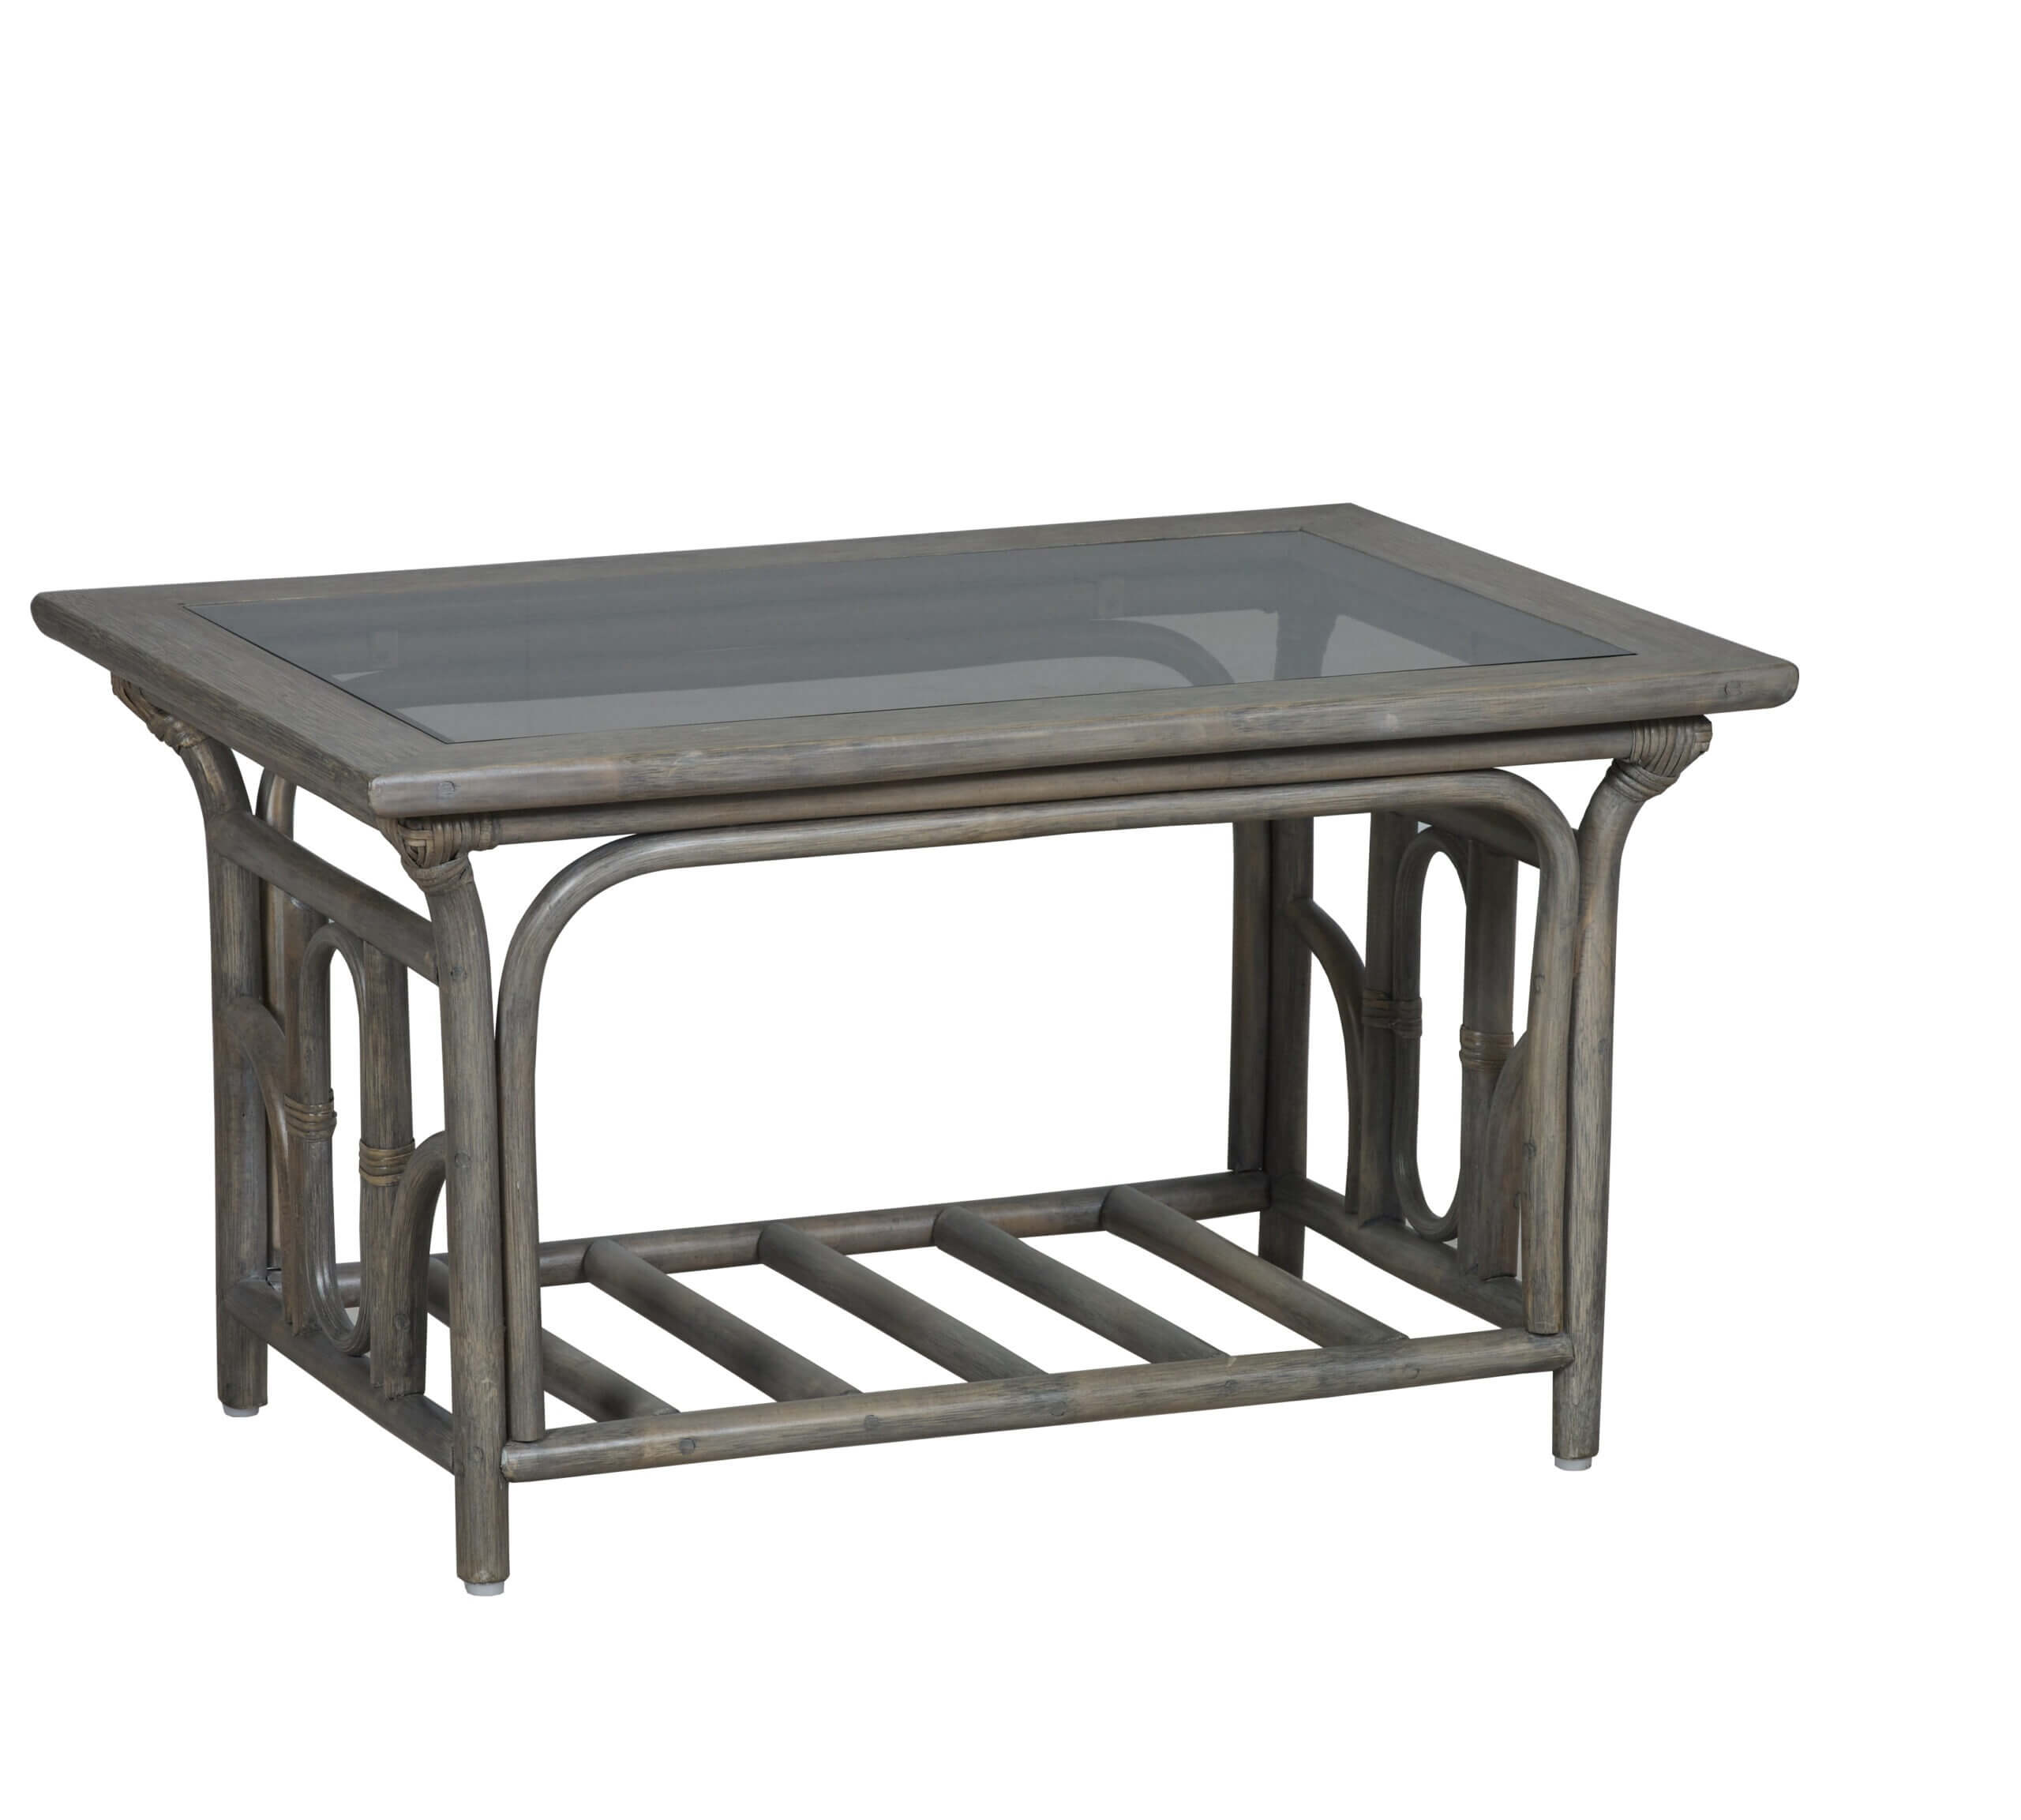 Showing image for Lupo coffee table